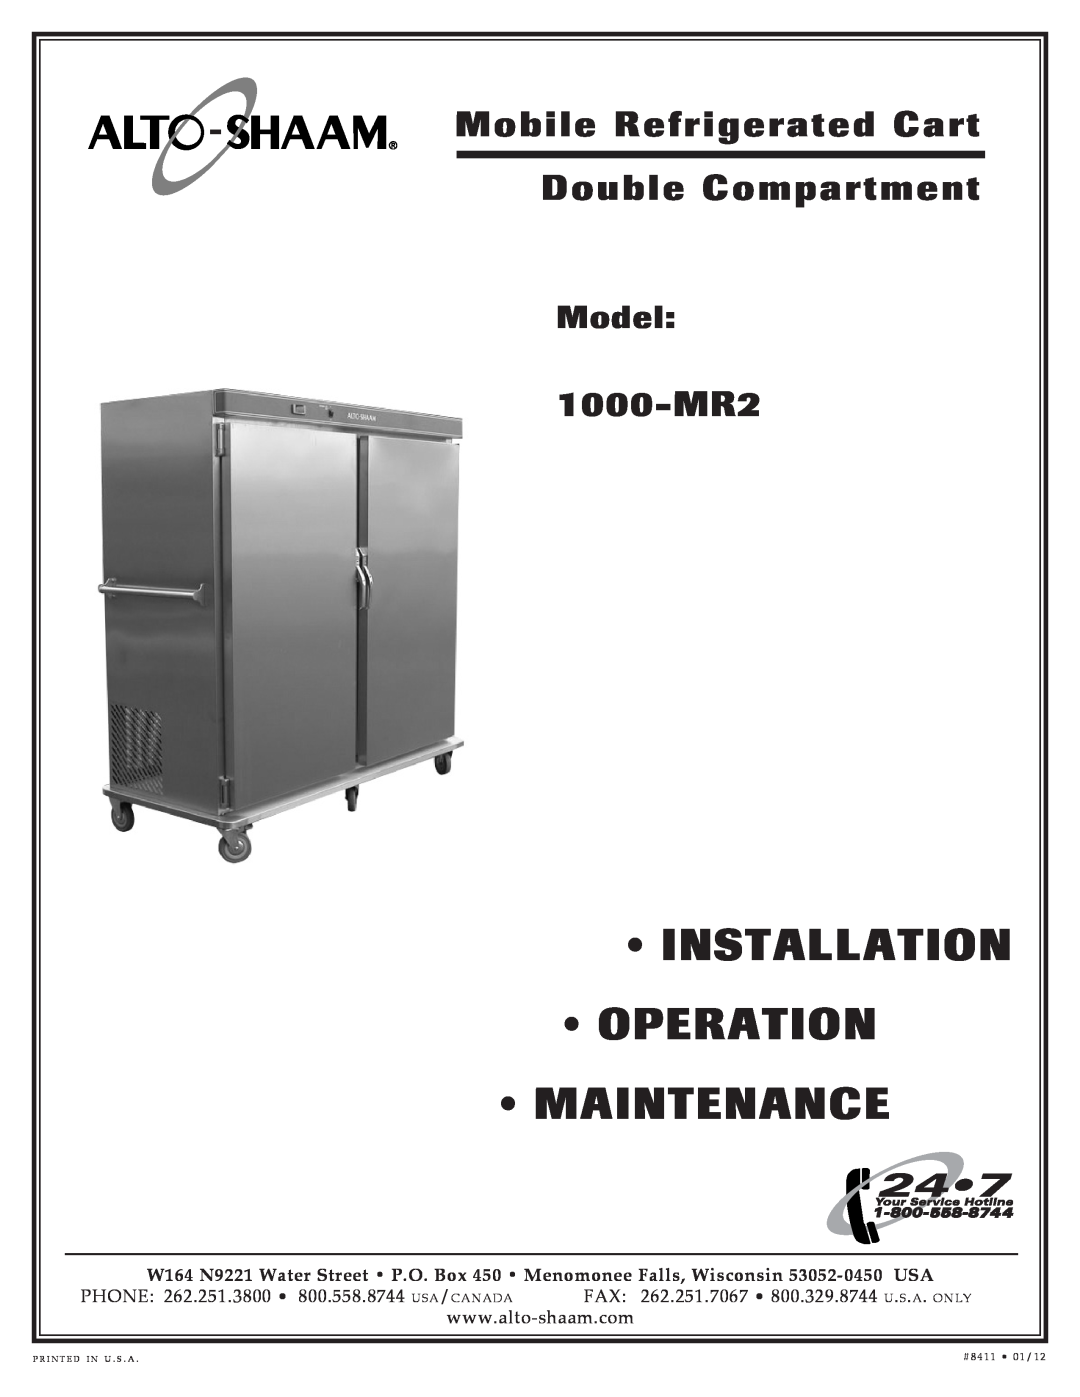 Alto-Shaam mobile refigerated cart double comopartment manual Installation Operation Maintenance, 1000-MR2, Model 